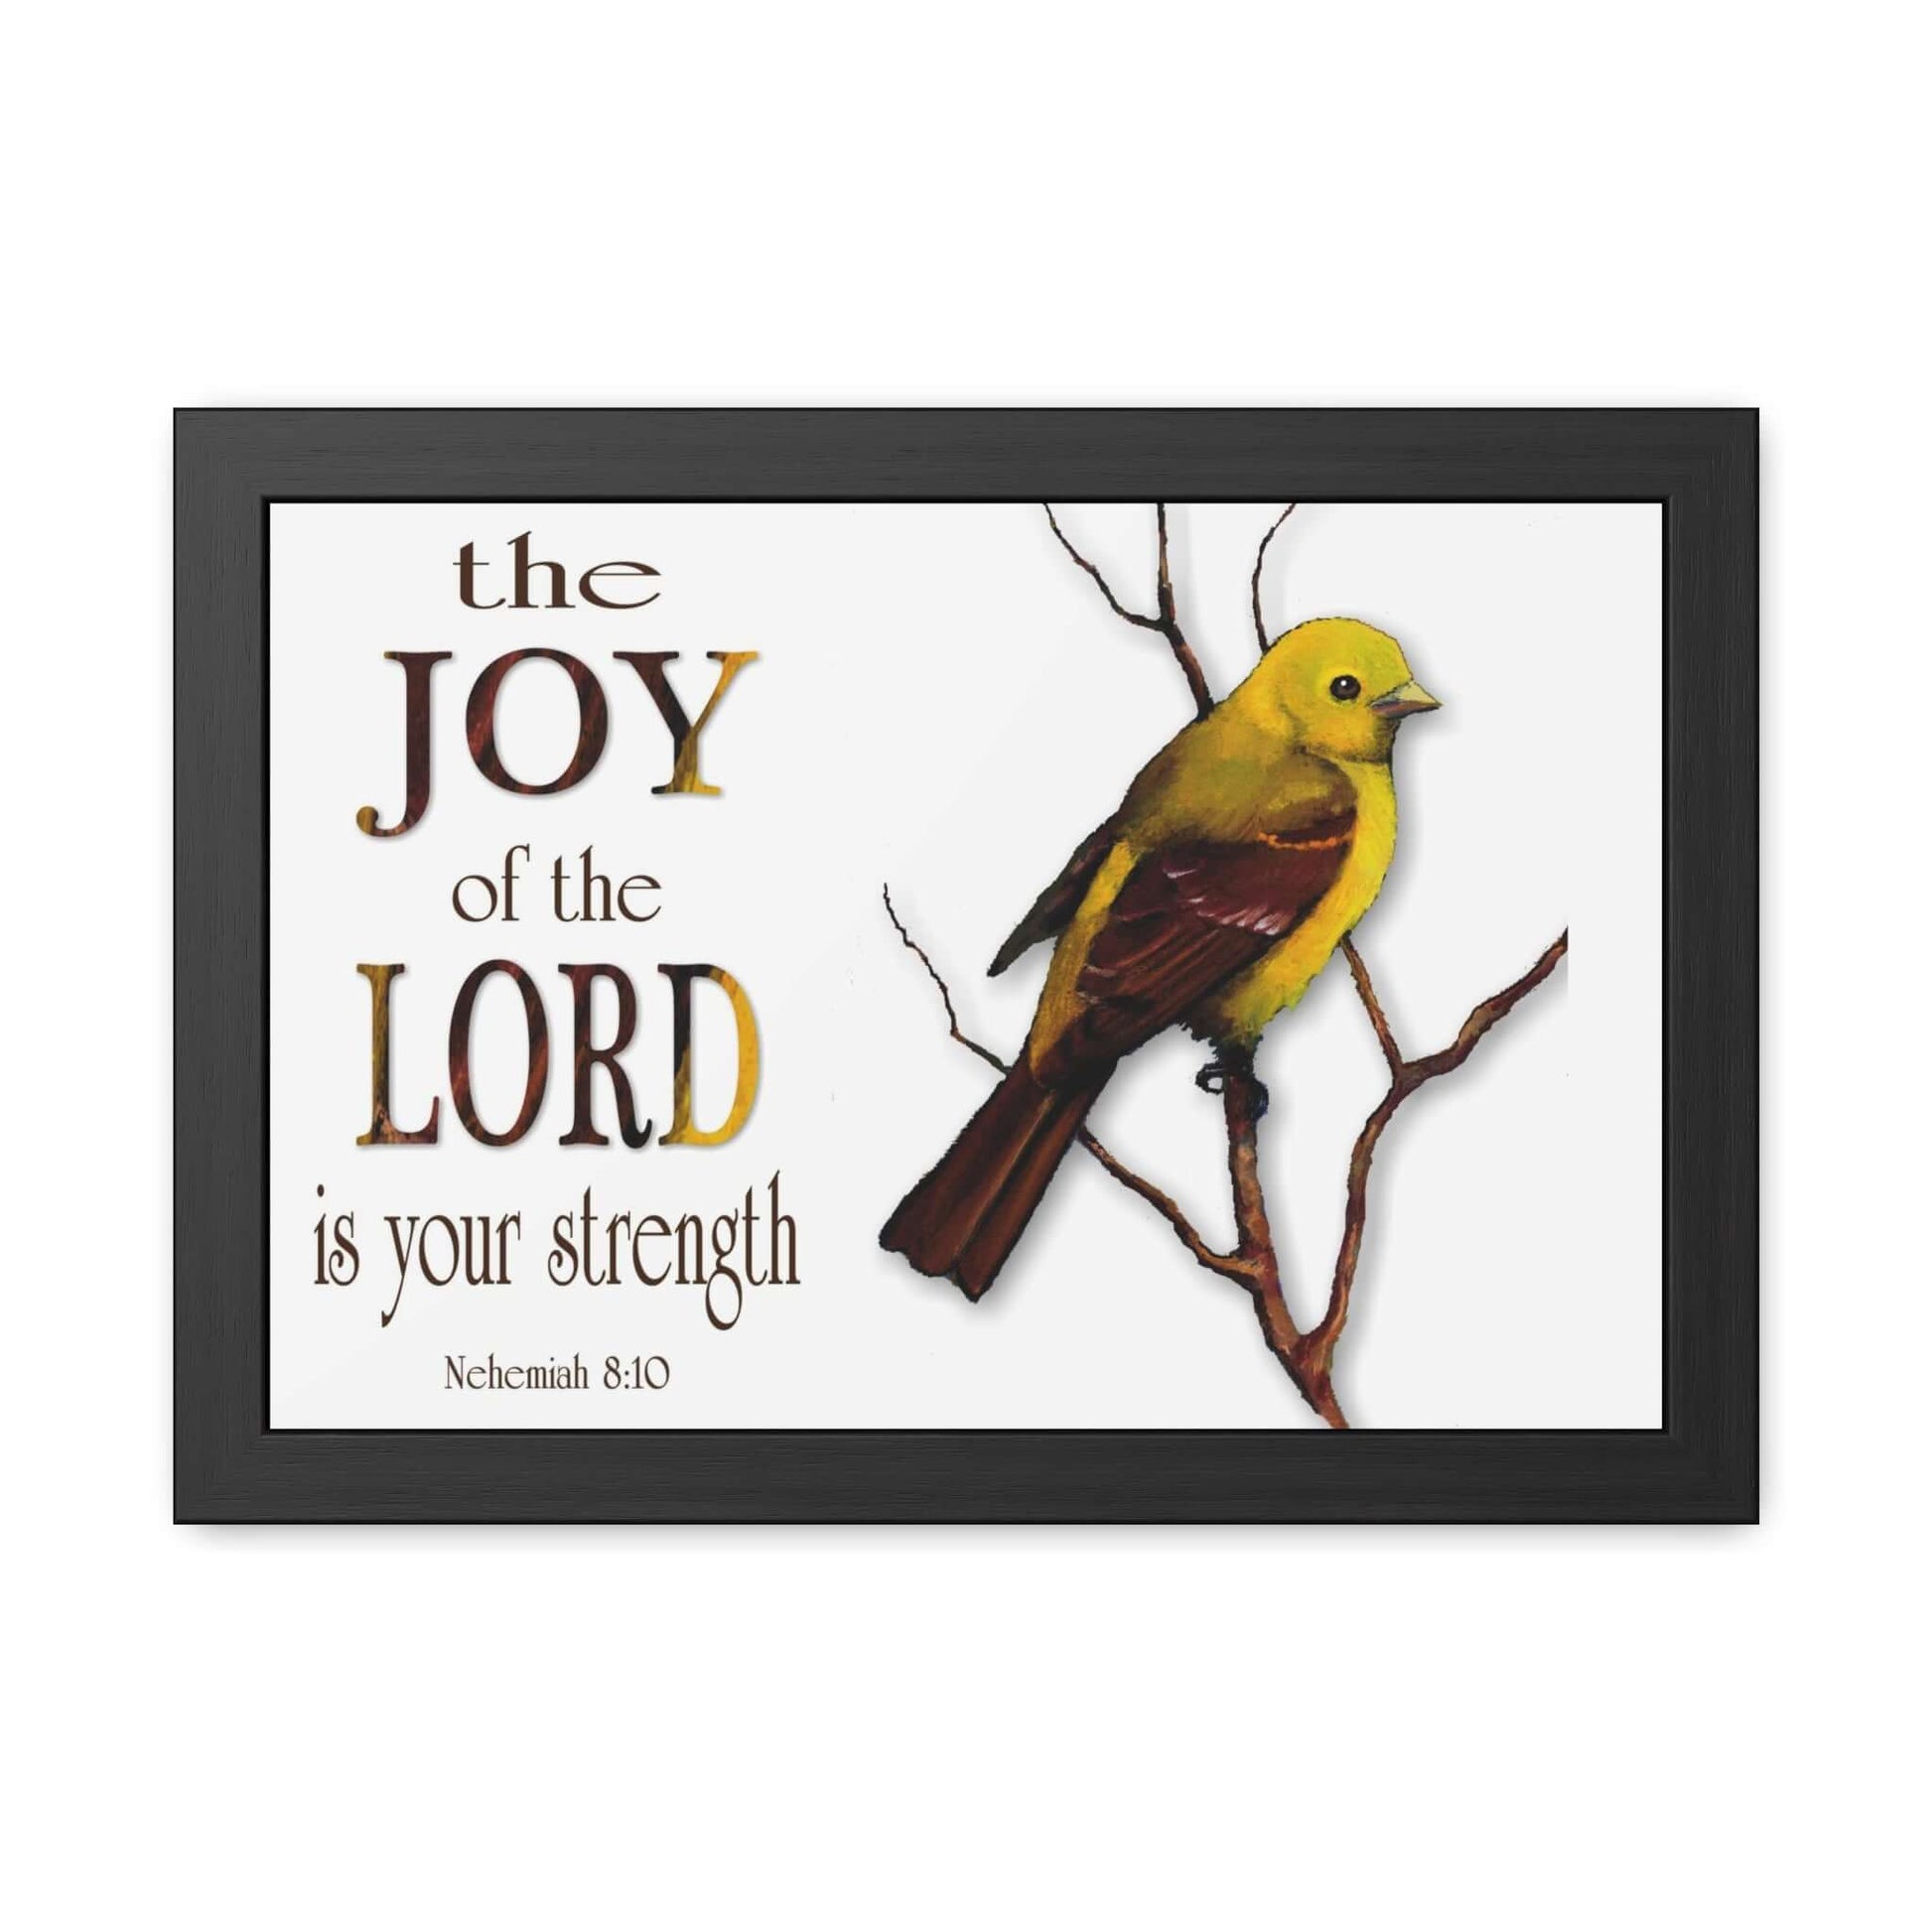 Framed Poster with Hand-Crafted Wooden Frame - Featuring Nehemiah 8:10 | Art & Wall Decor,Framed,Hanging Hardware,Home & Living,Poster,Posters